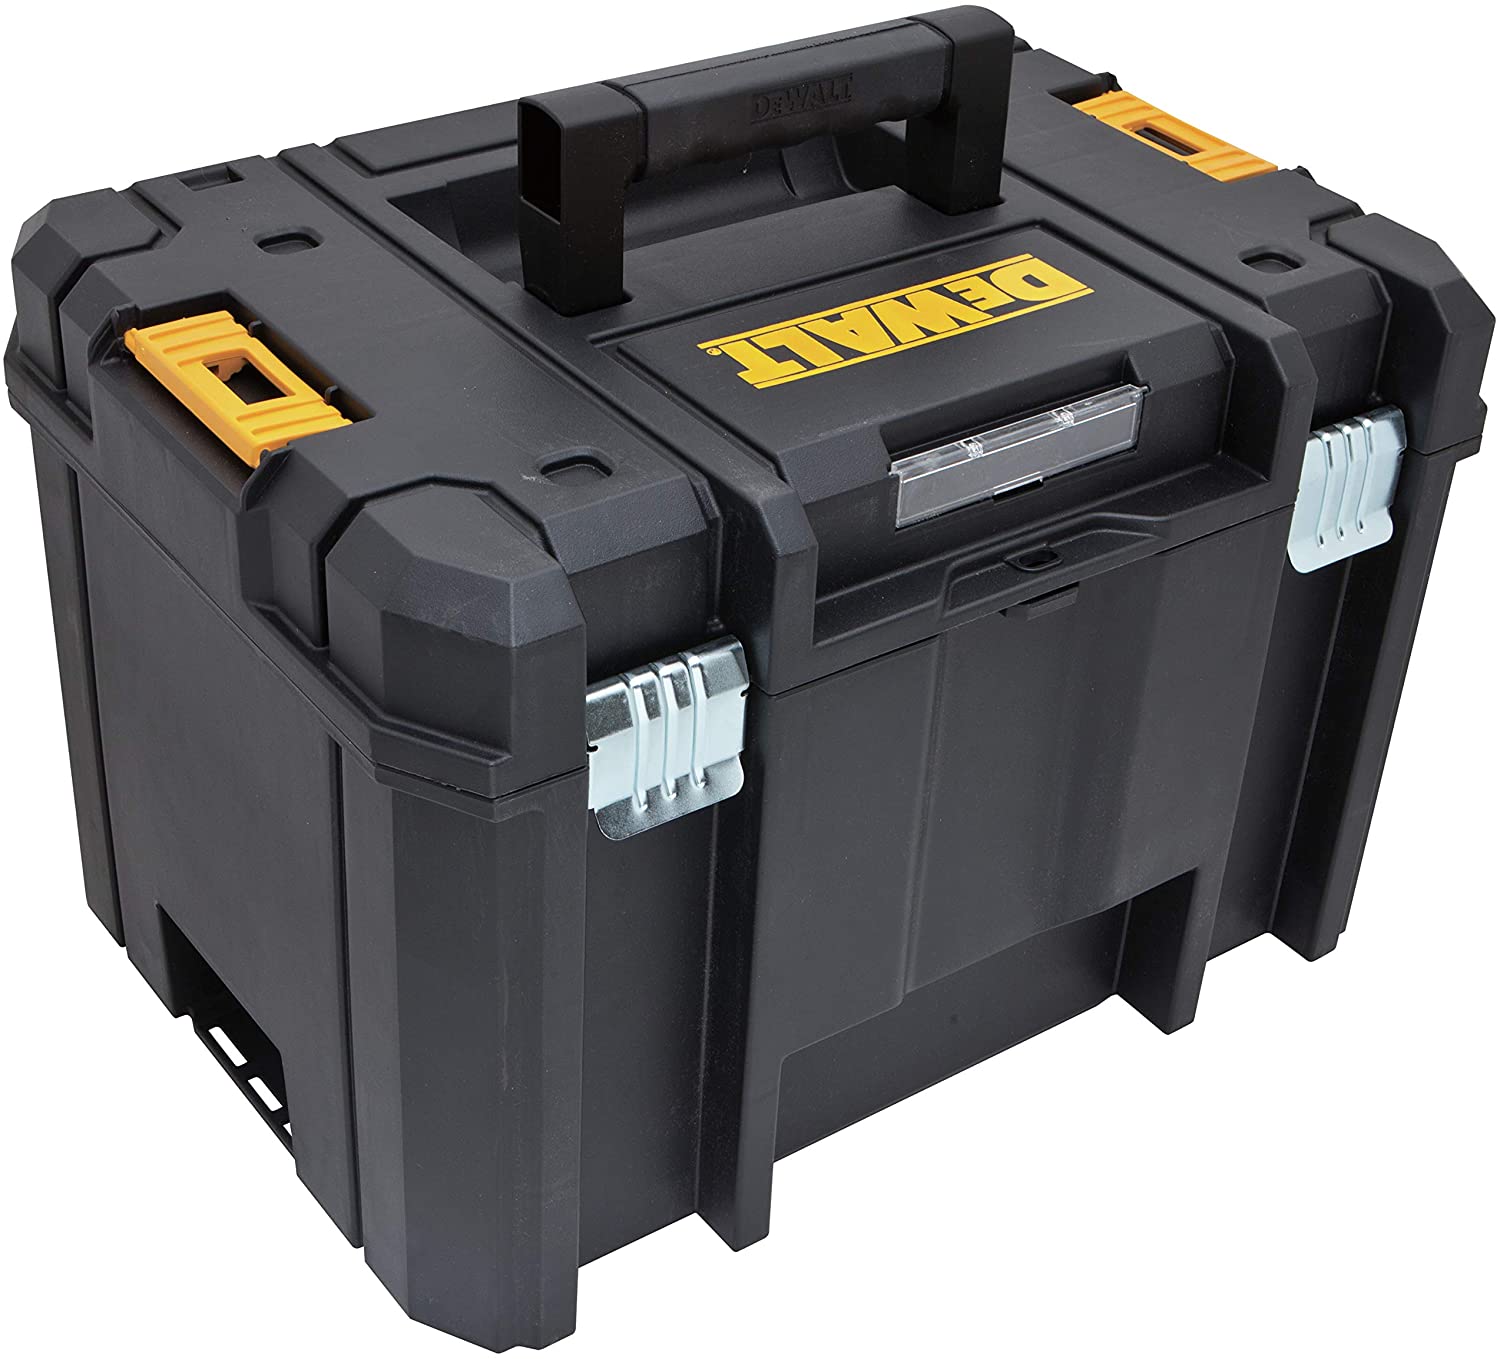 Details about   Parat 1.945.010.001 Limited Edition Tool Box With High Bottom Tray 